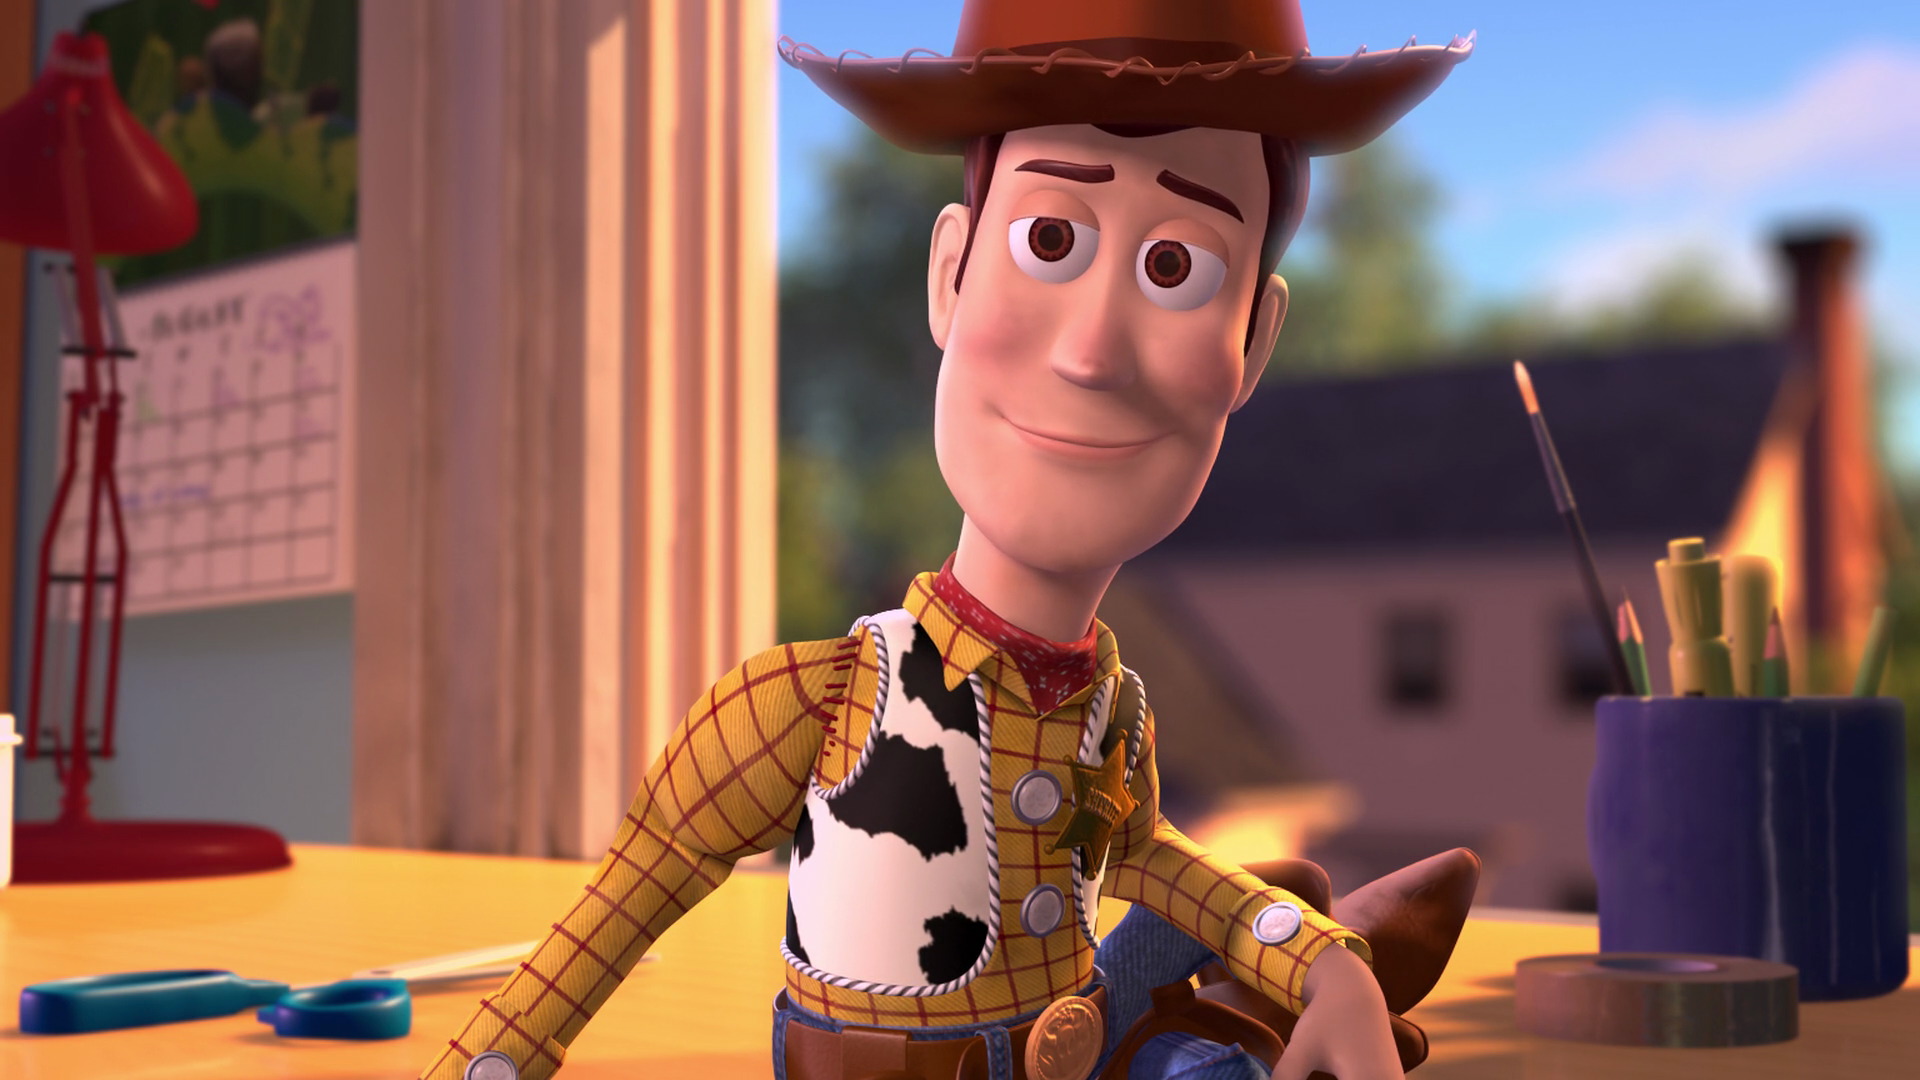 Woody Wallpapers